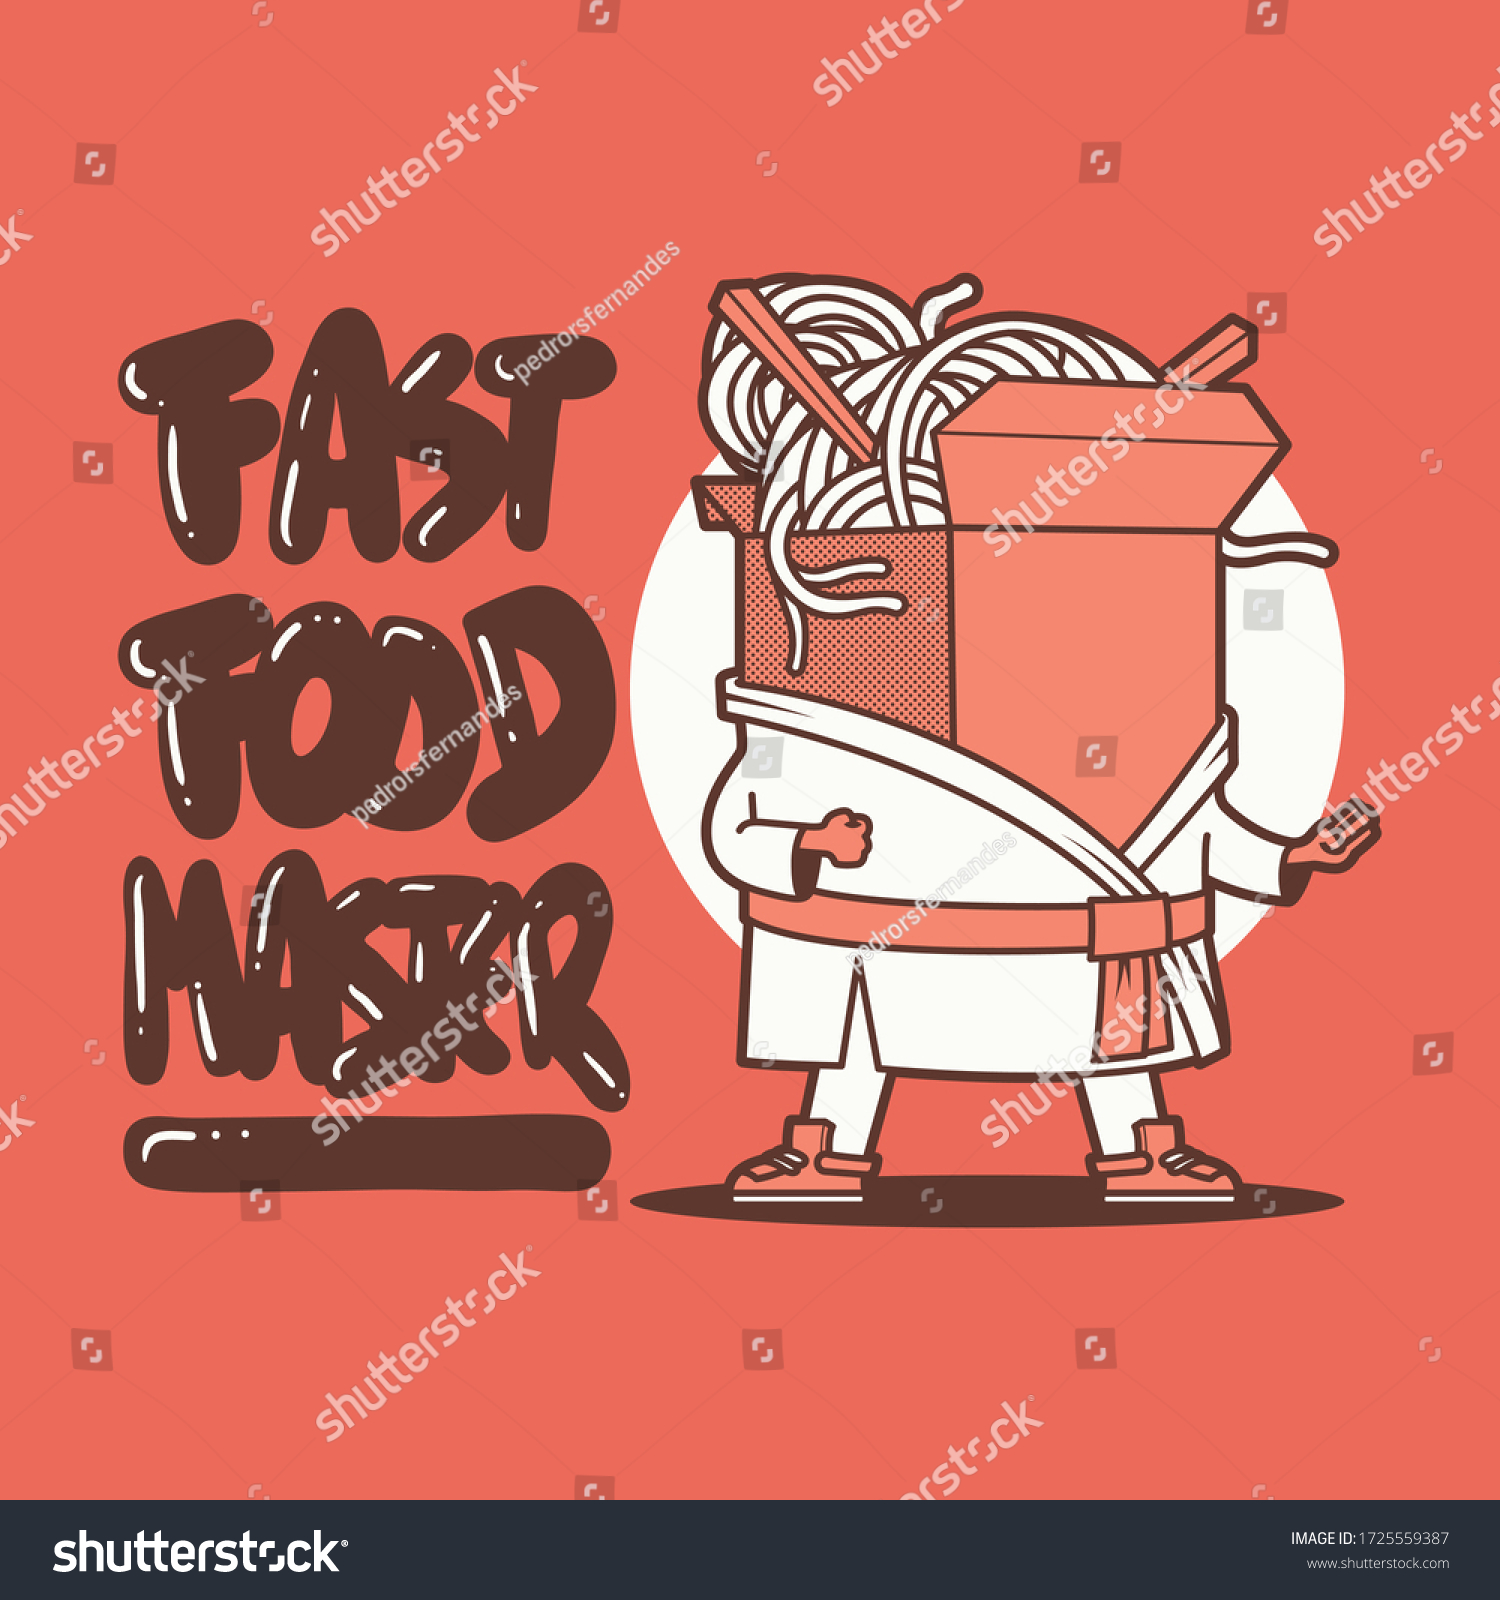 SVG of Take away food box character vector illustration. Delivery, fast food, Chinese design concept svg